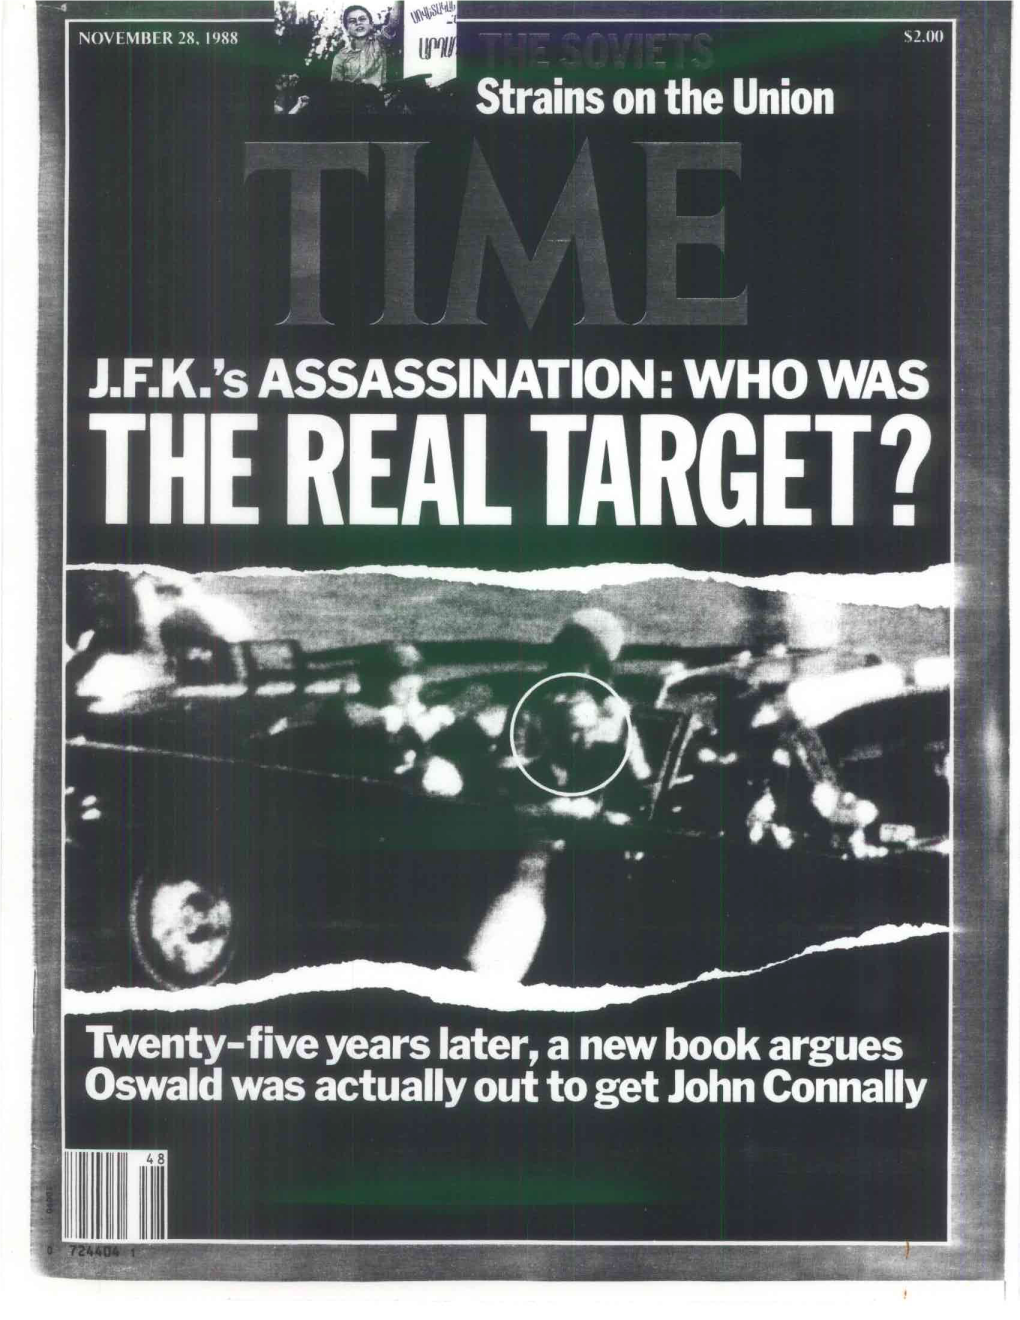 J.F.K.'S ASSASSINATION: WHO WAS the REAL TARGET?